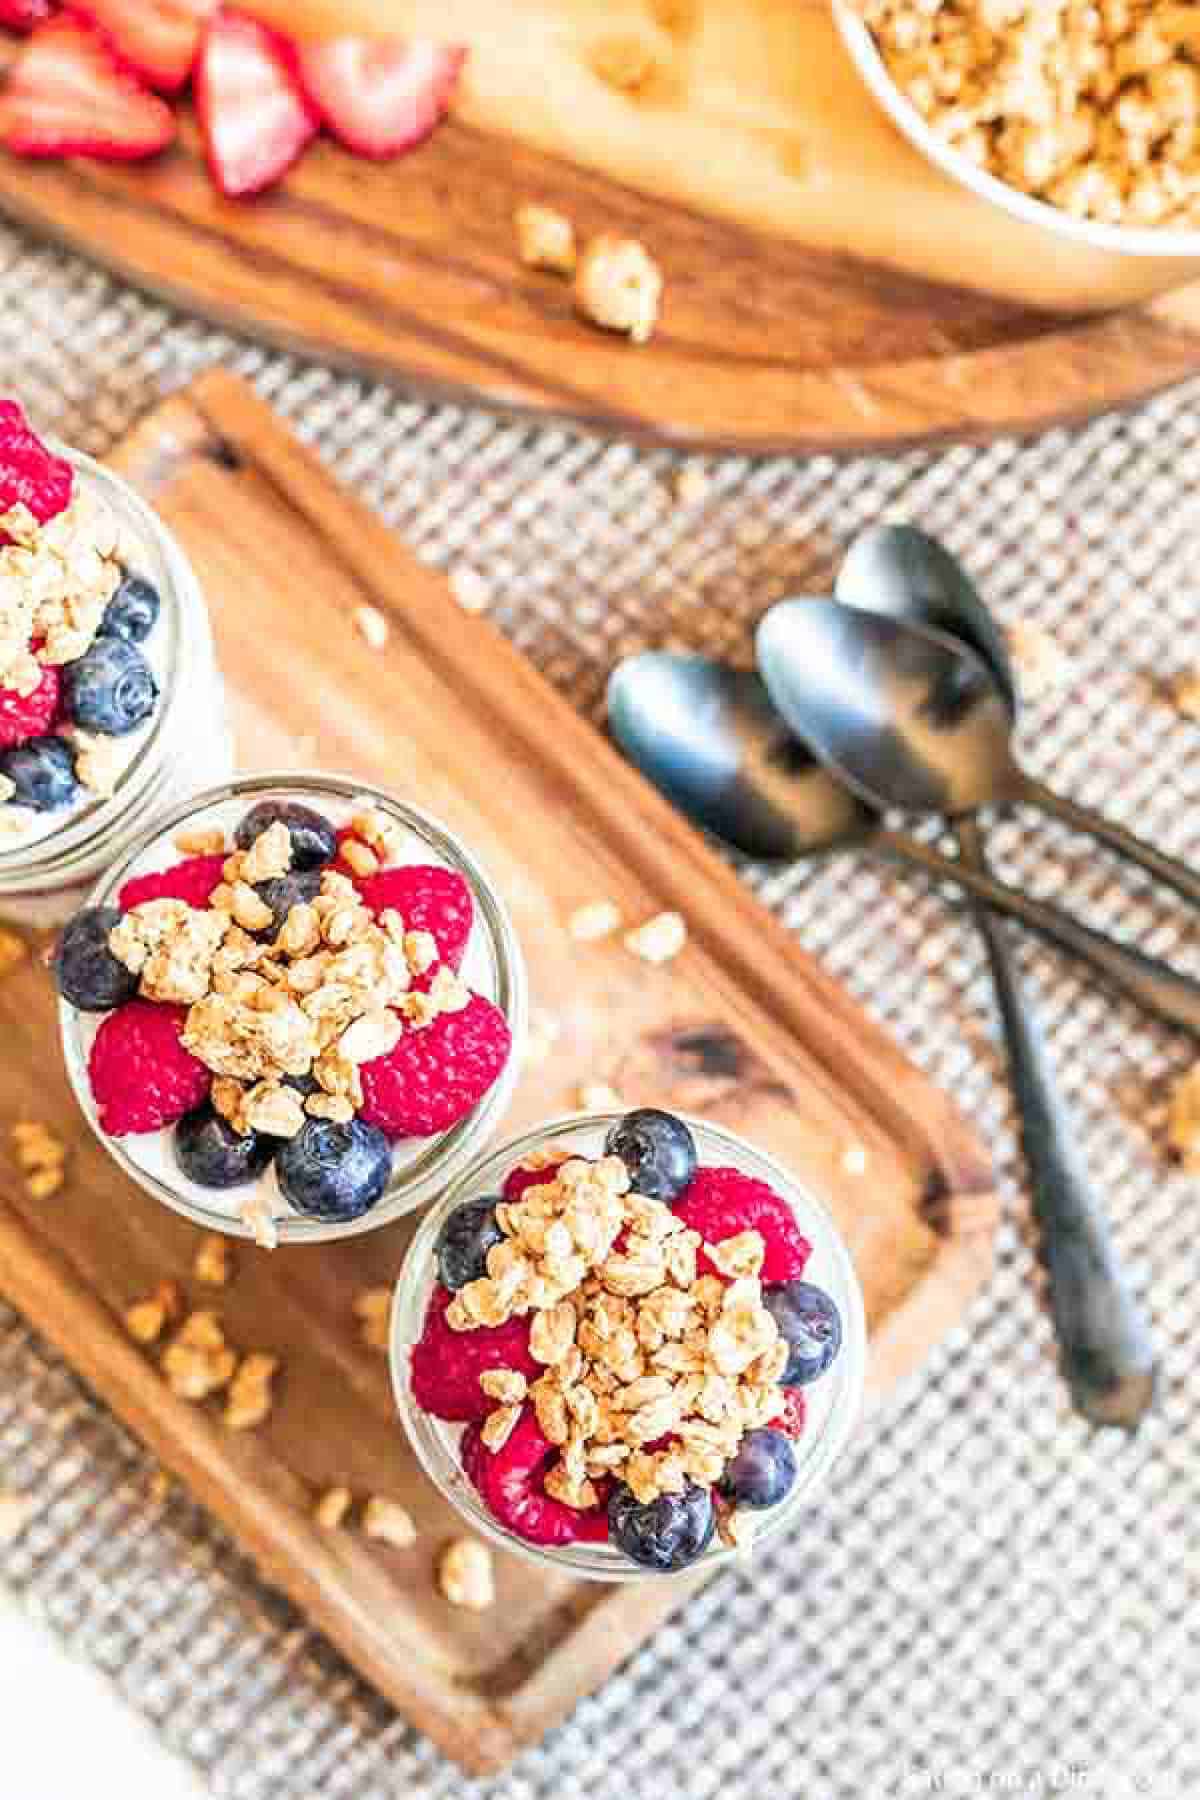 Fruit and yogurt parfaits on a wooden platter topped with granola, raspberries and blueberries